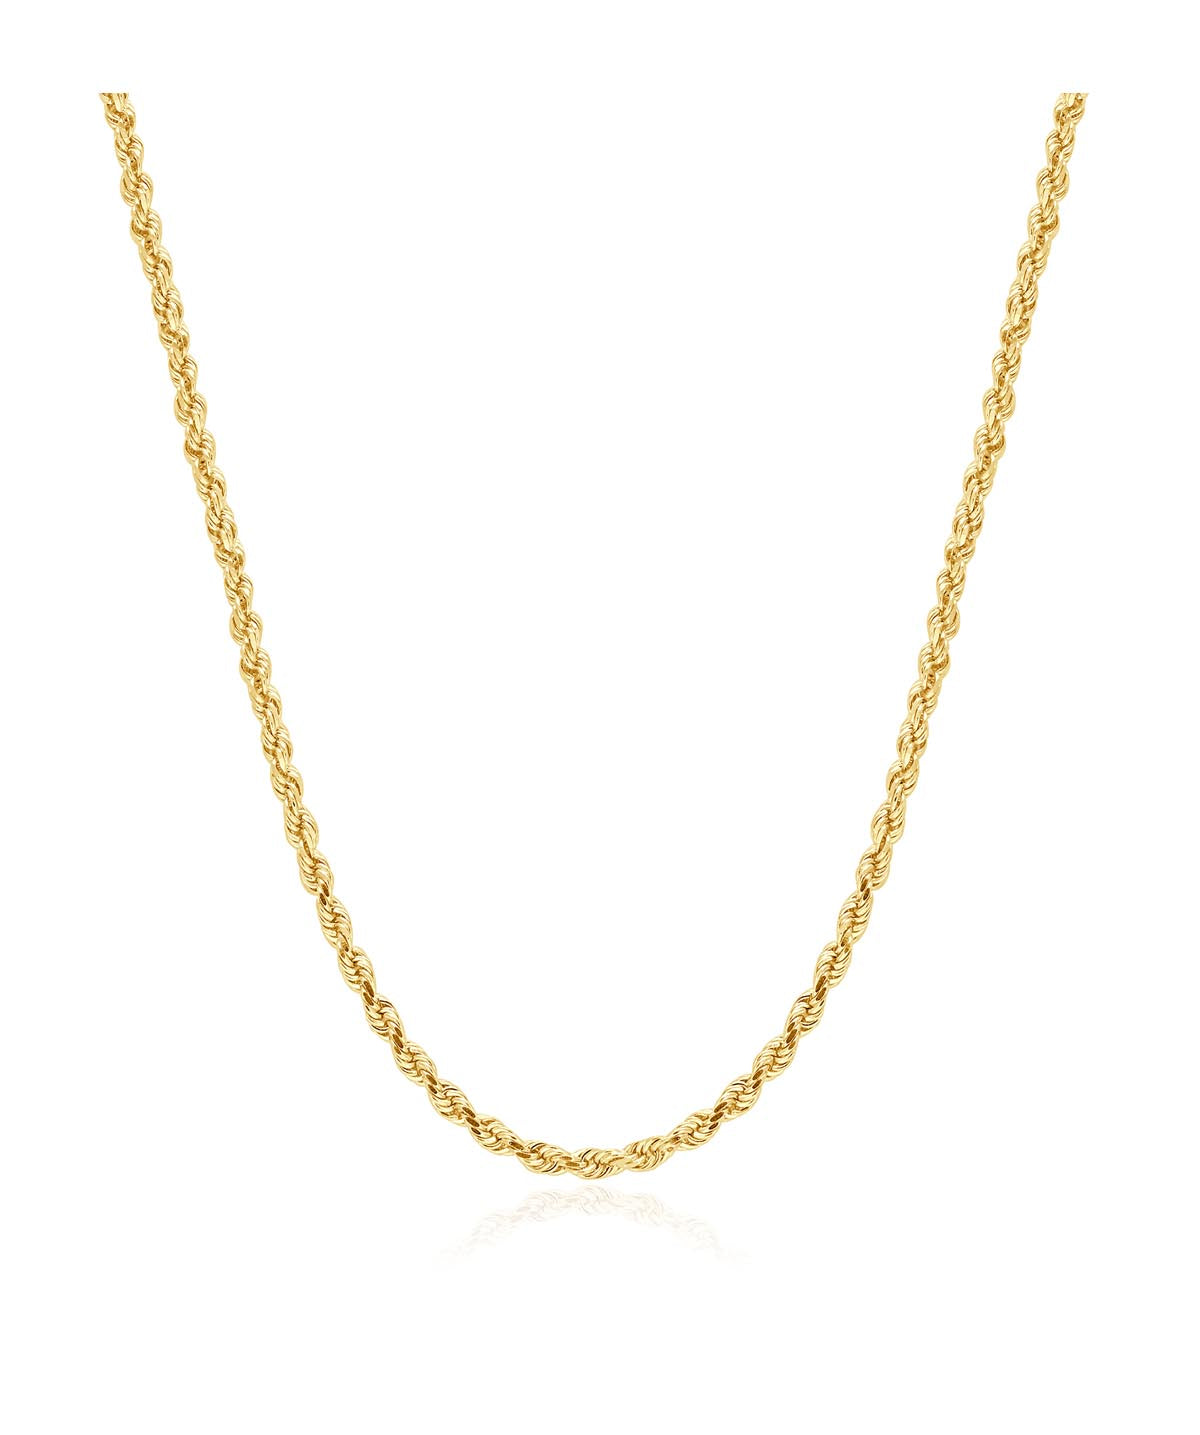 14K Yellow Gold Solid 2.5mm Rope Chain 22"